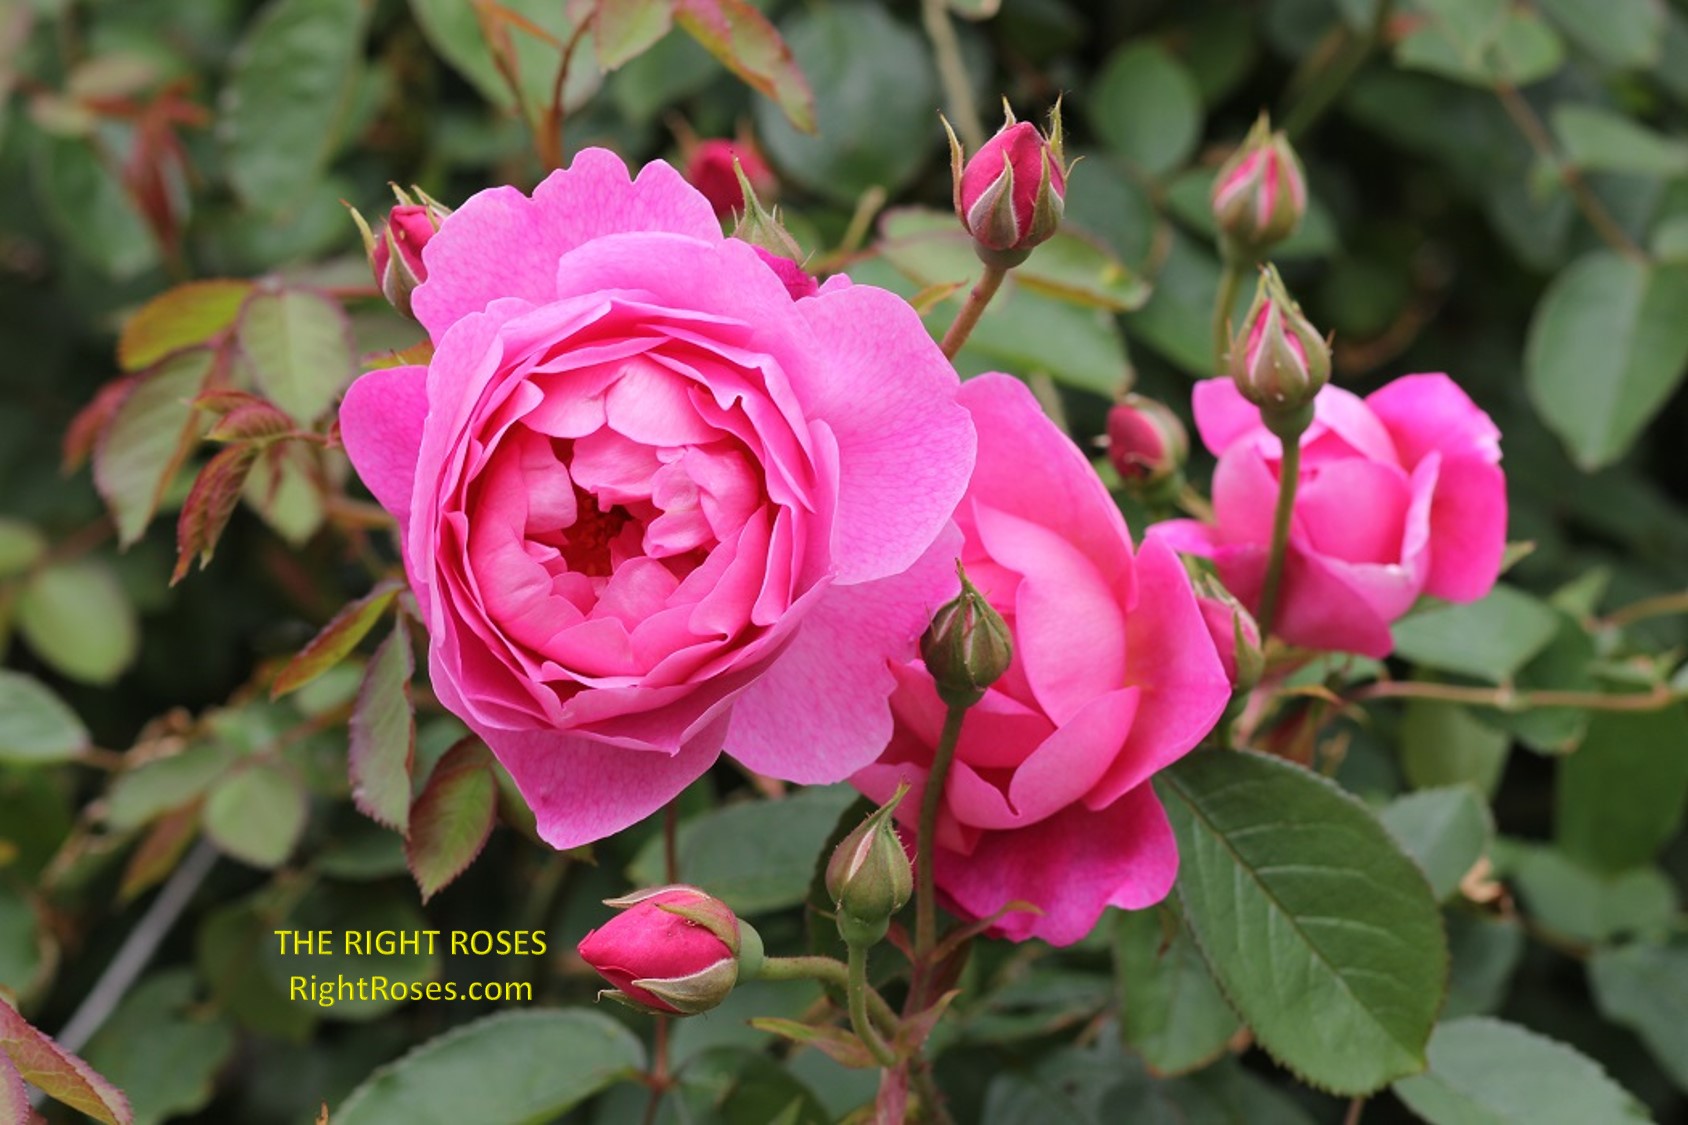 royal jubilee rose review the right roses score best top garden store david austin english roses rose products rose rating the right leap rose food